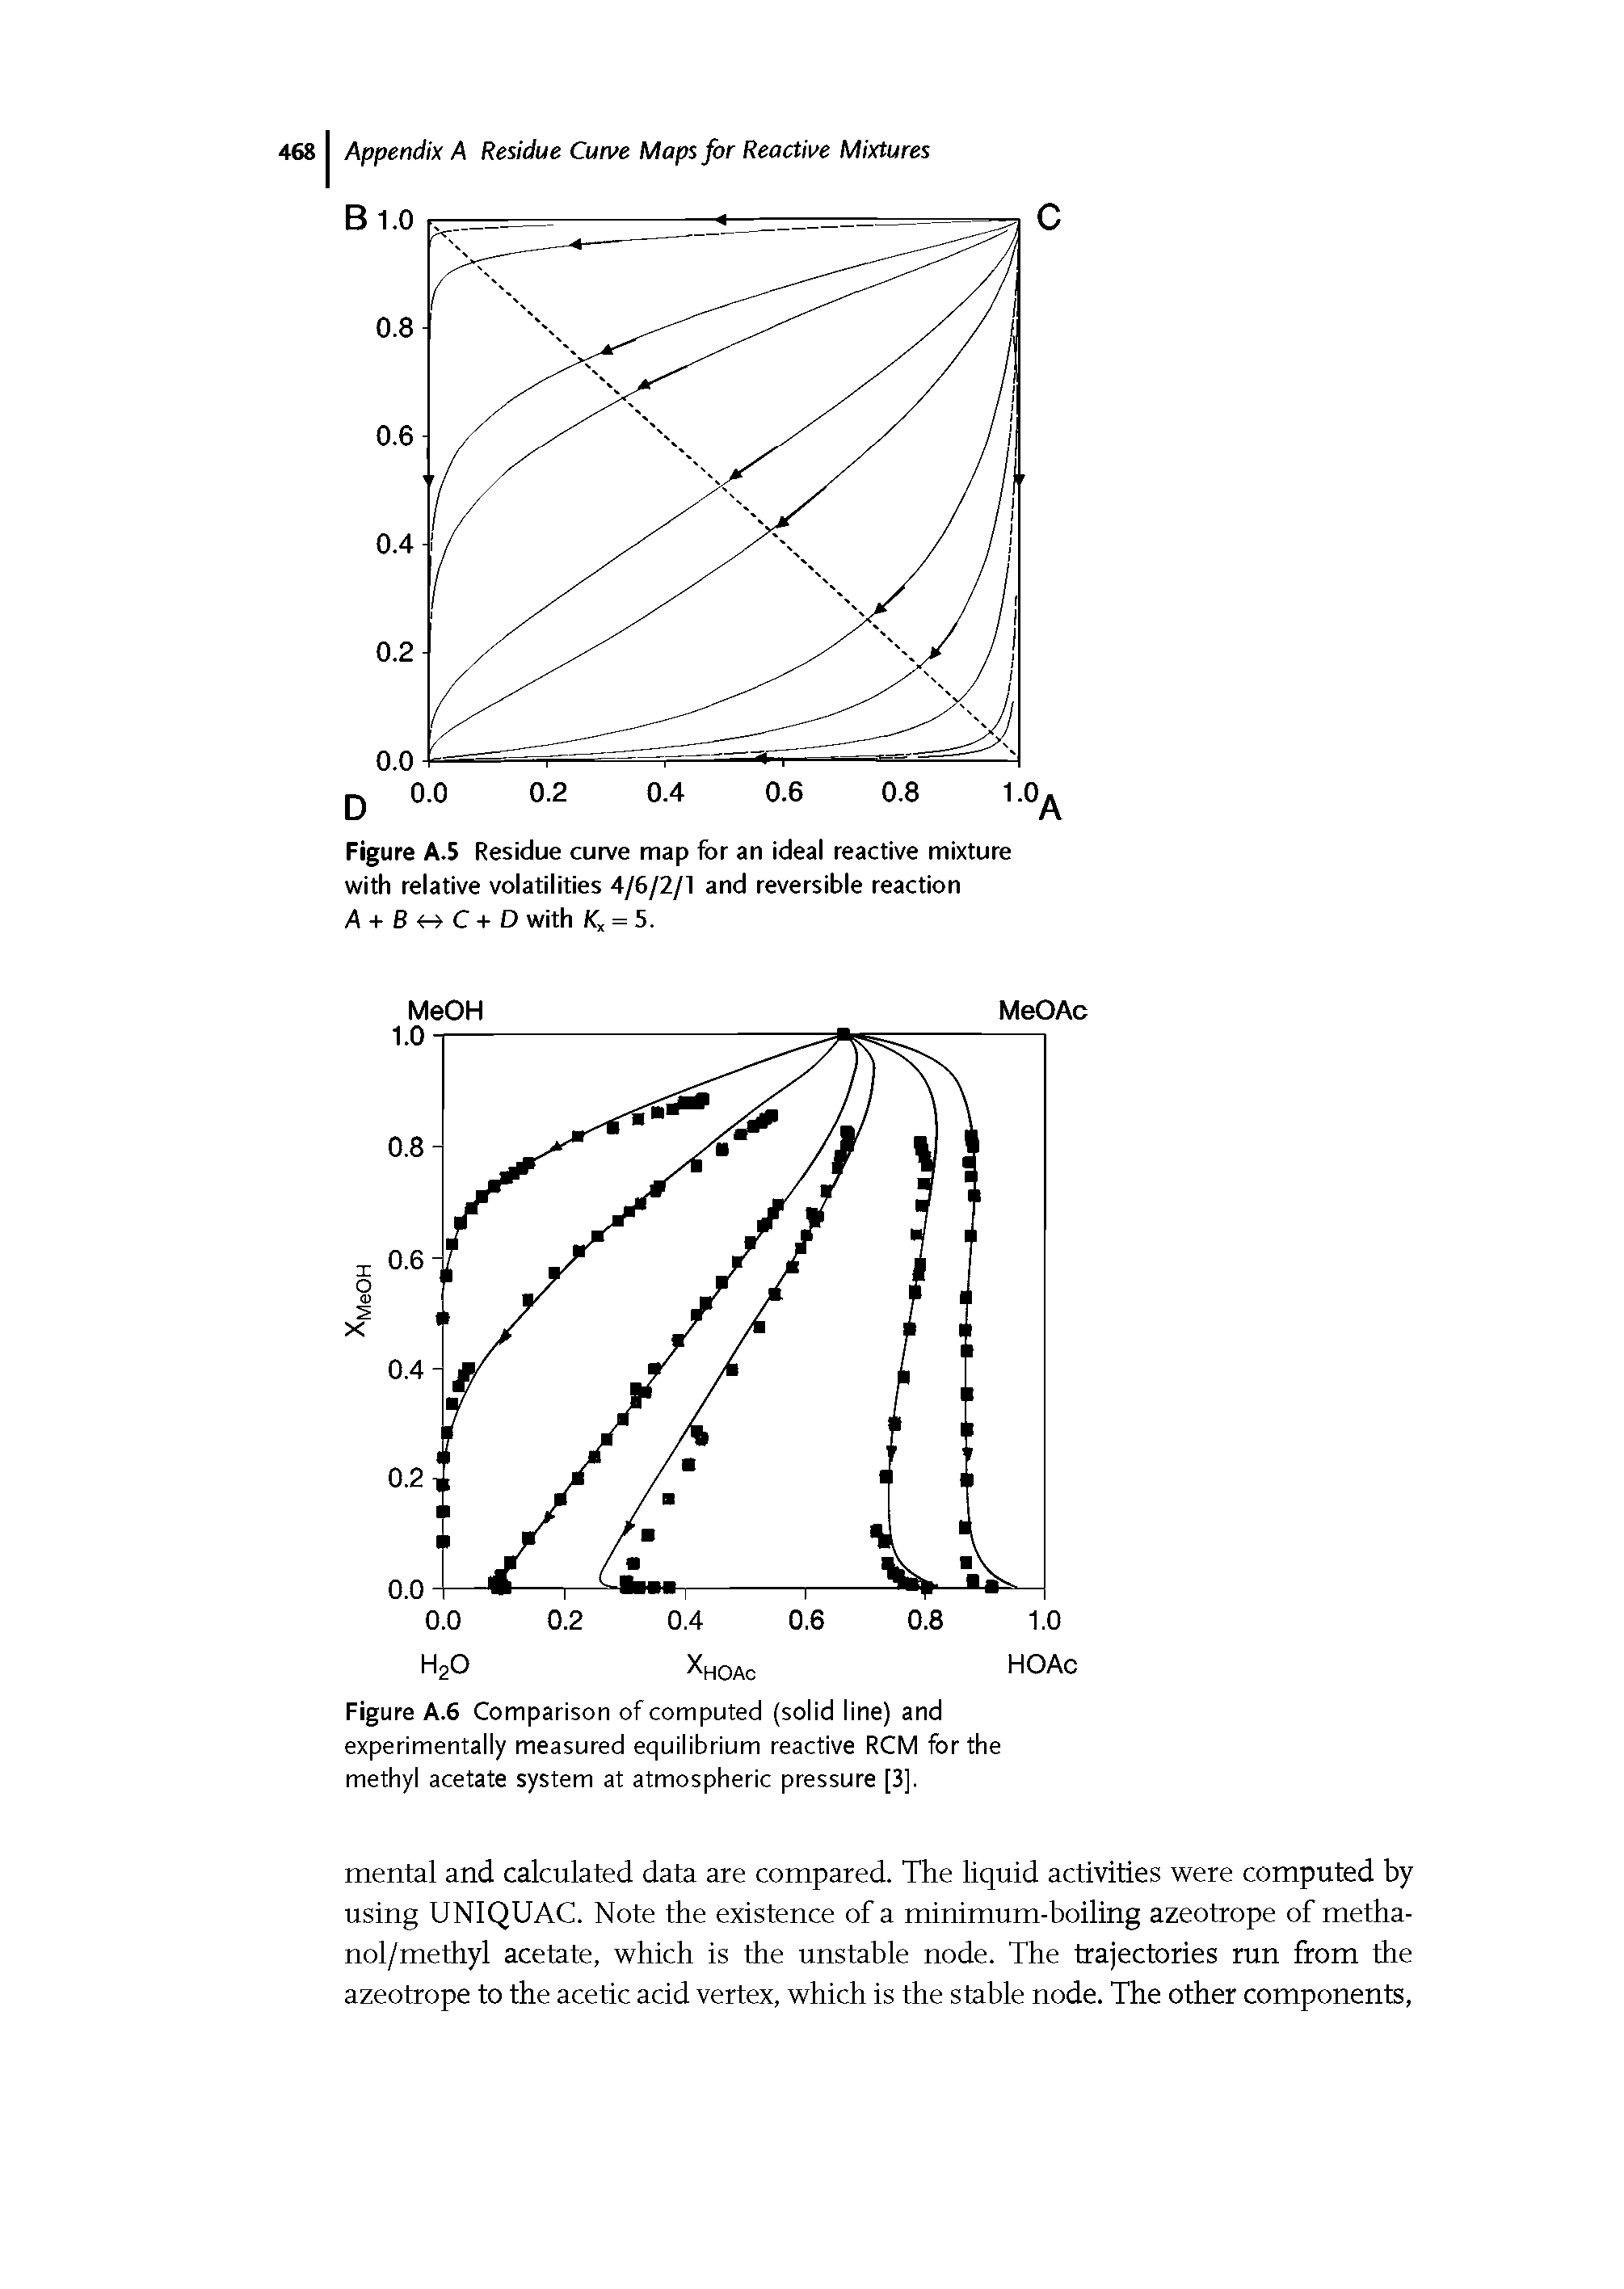 Figure A.6 Comparison of computed (solid line) and experimentally measured equilibrium reactive RCM for the methyl acetate system at atmospheric pressure [3],...